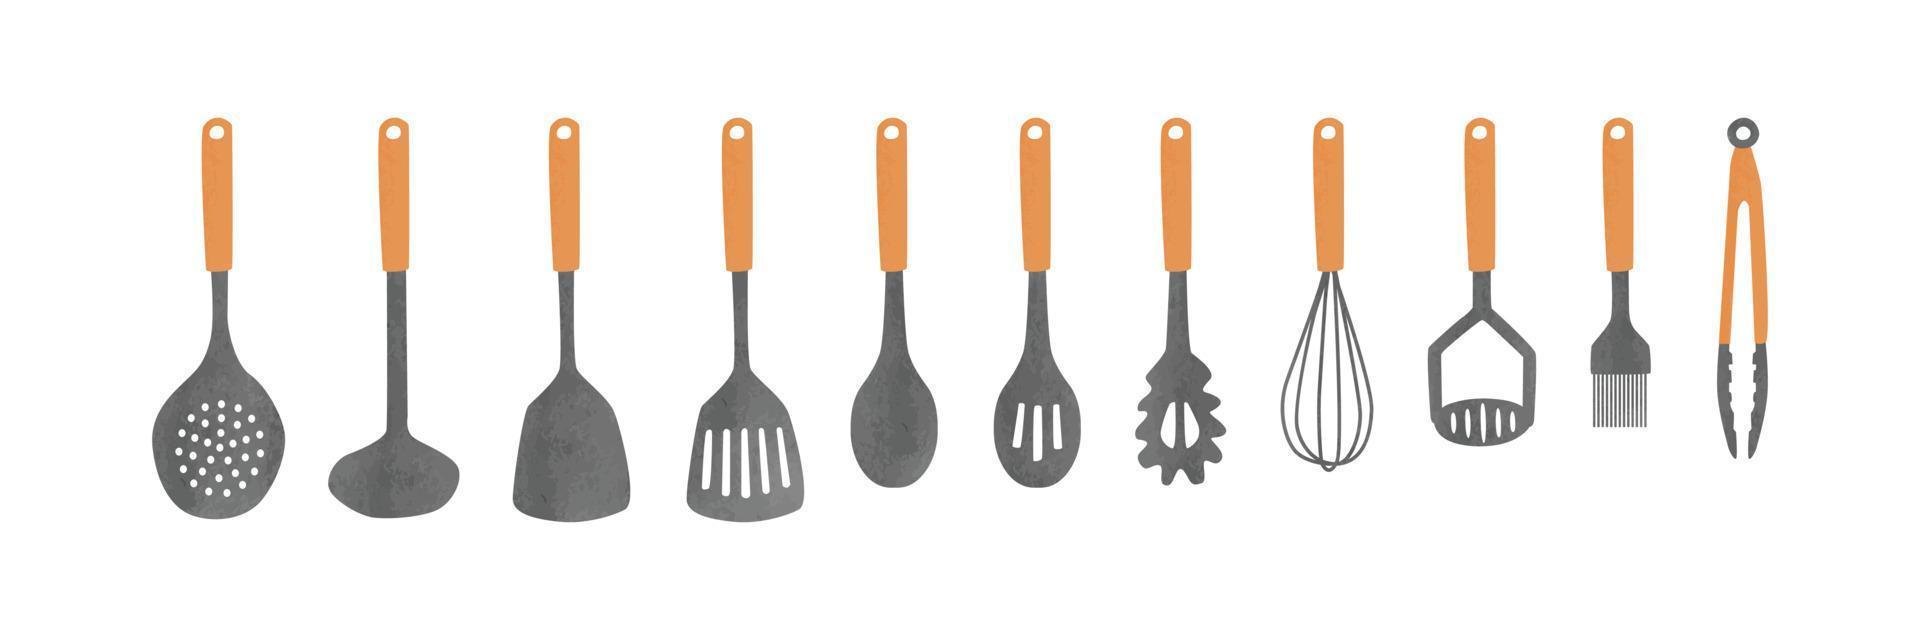 Set of cooking tools with wooden handle clipart. Cooking tools set watercolor vector isolated on white. Skimmer, ladle, slotted spatula, spoon, pasta server, whisk, potato masher, basting brush, tongs